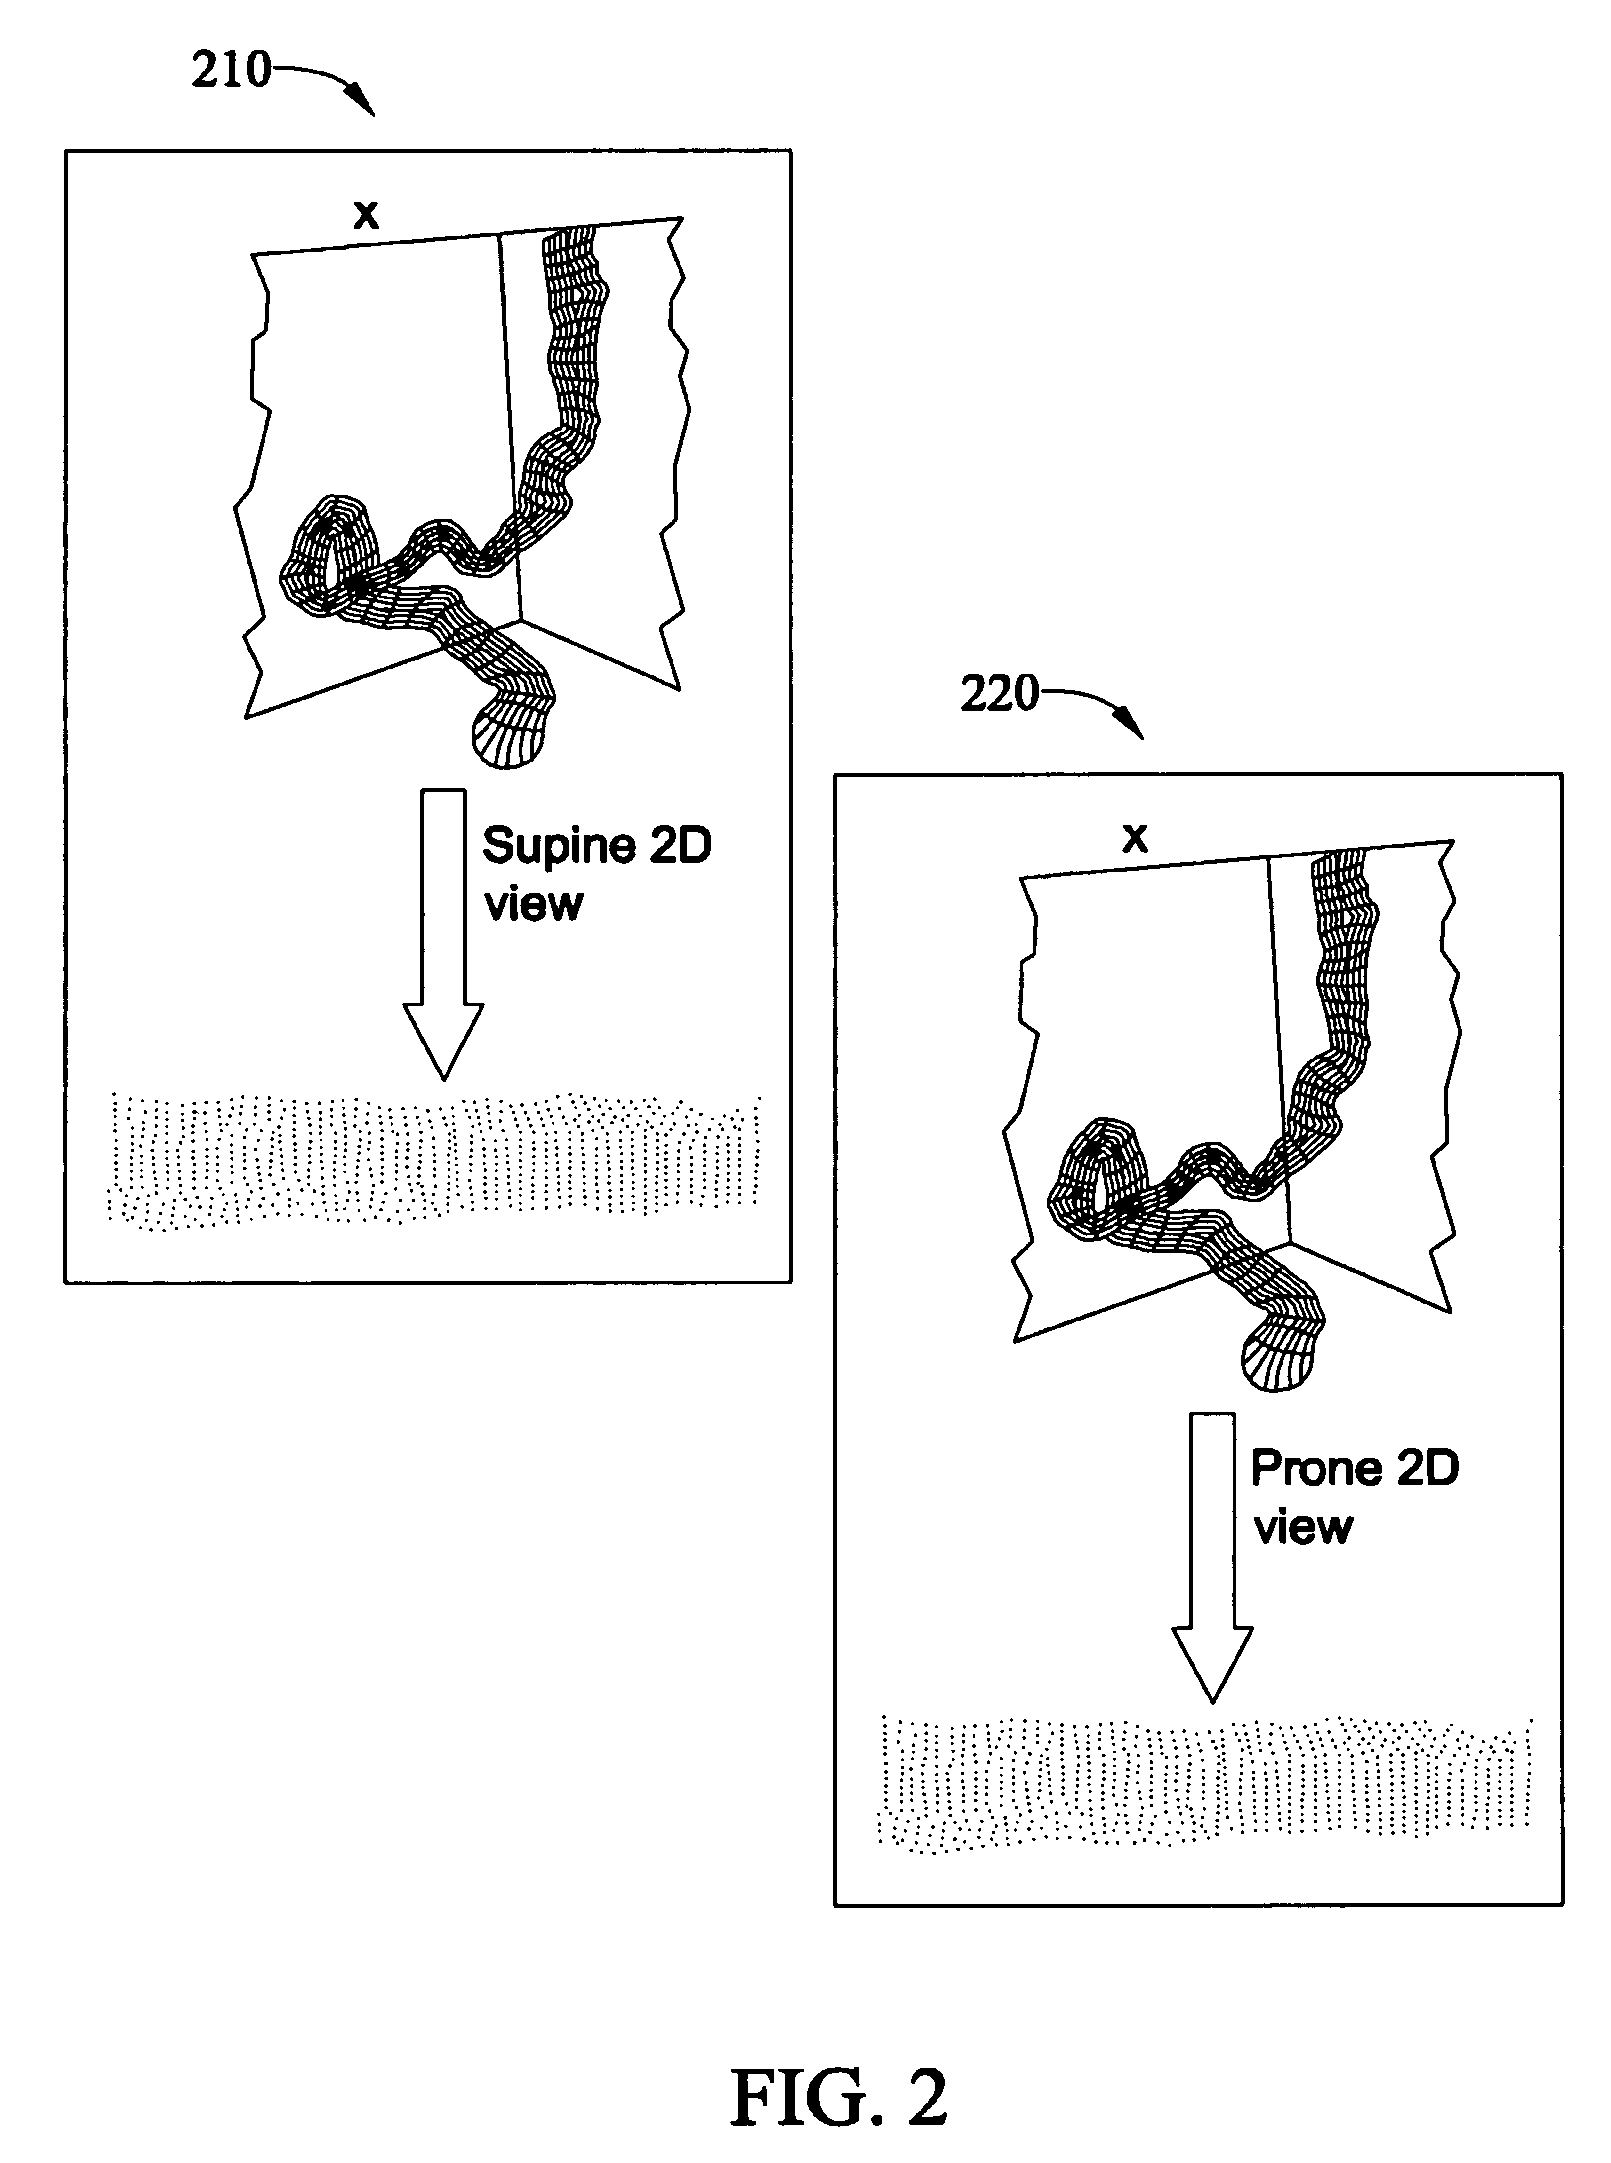 Method and apparatus for synchronizing corresponding landmarks among a plurality of images